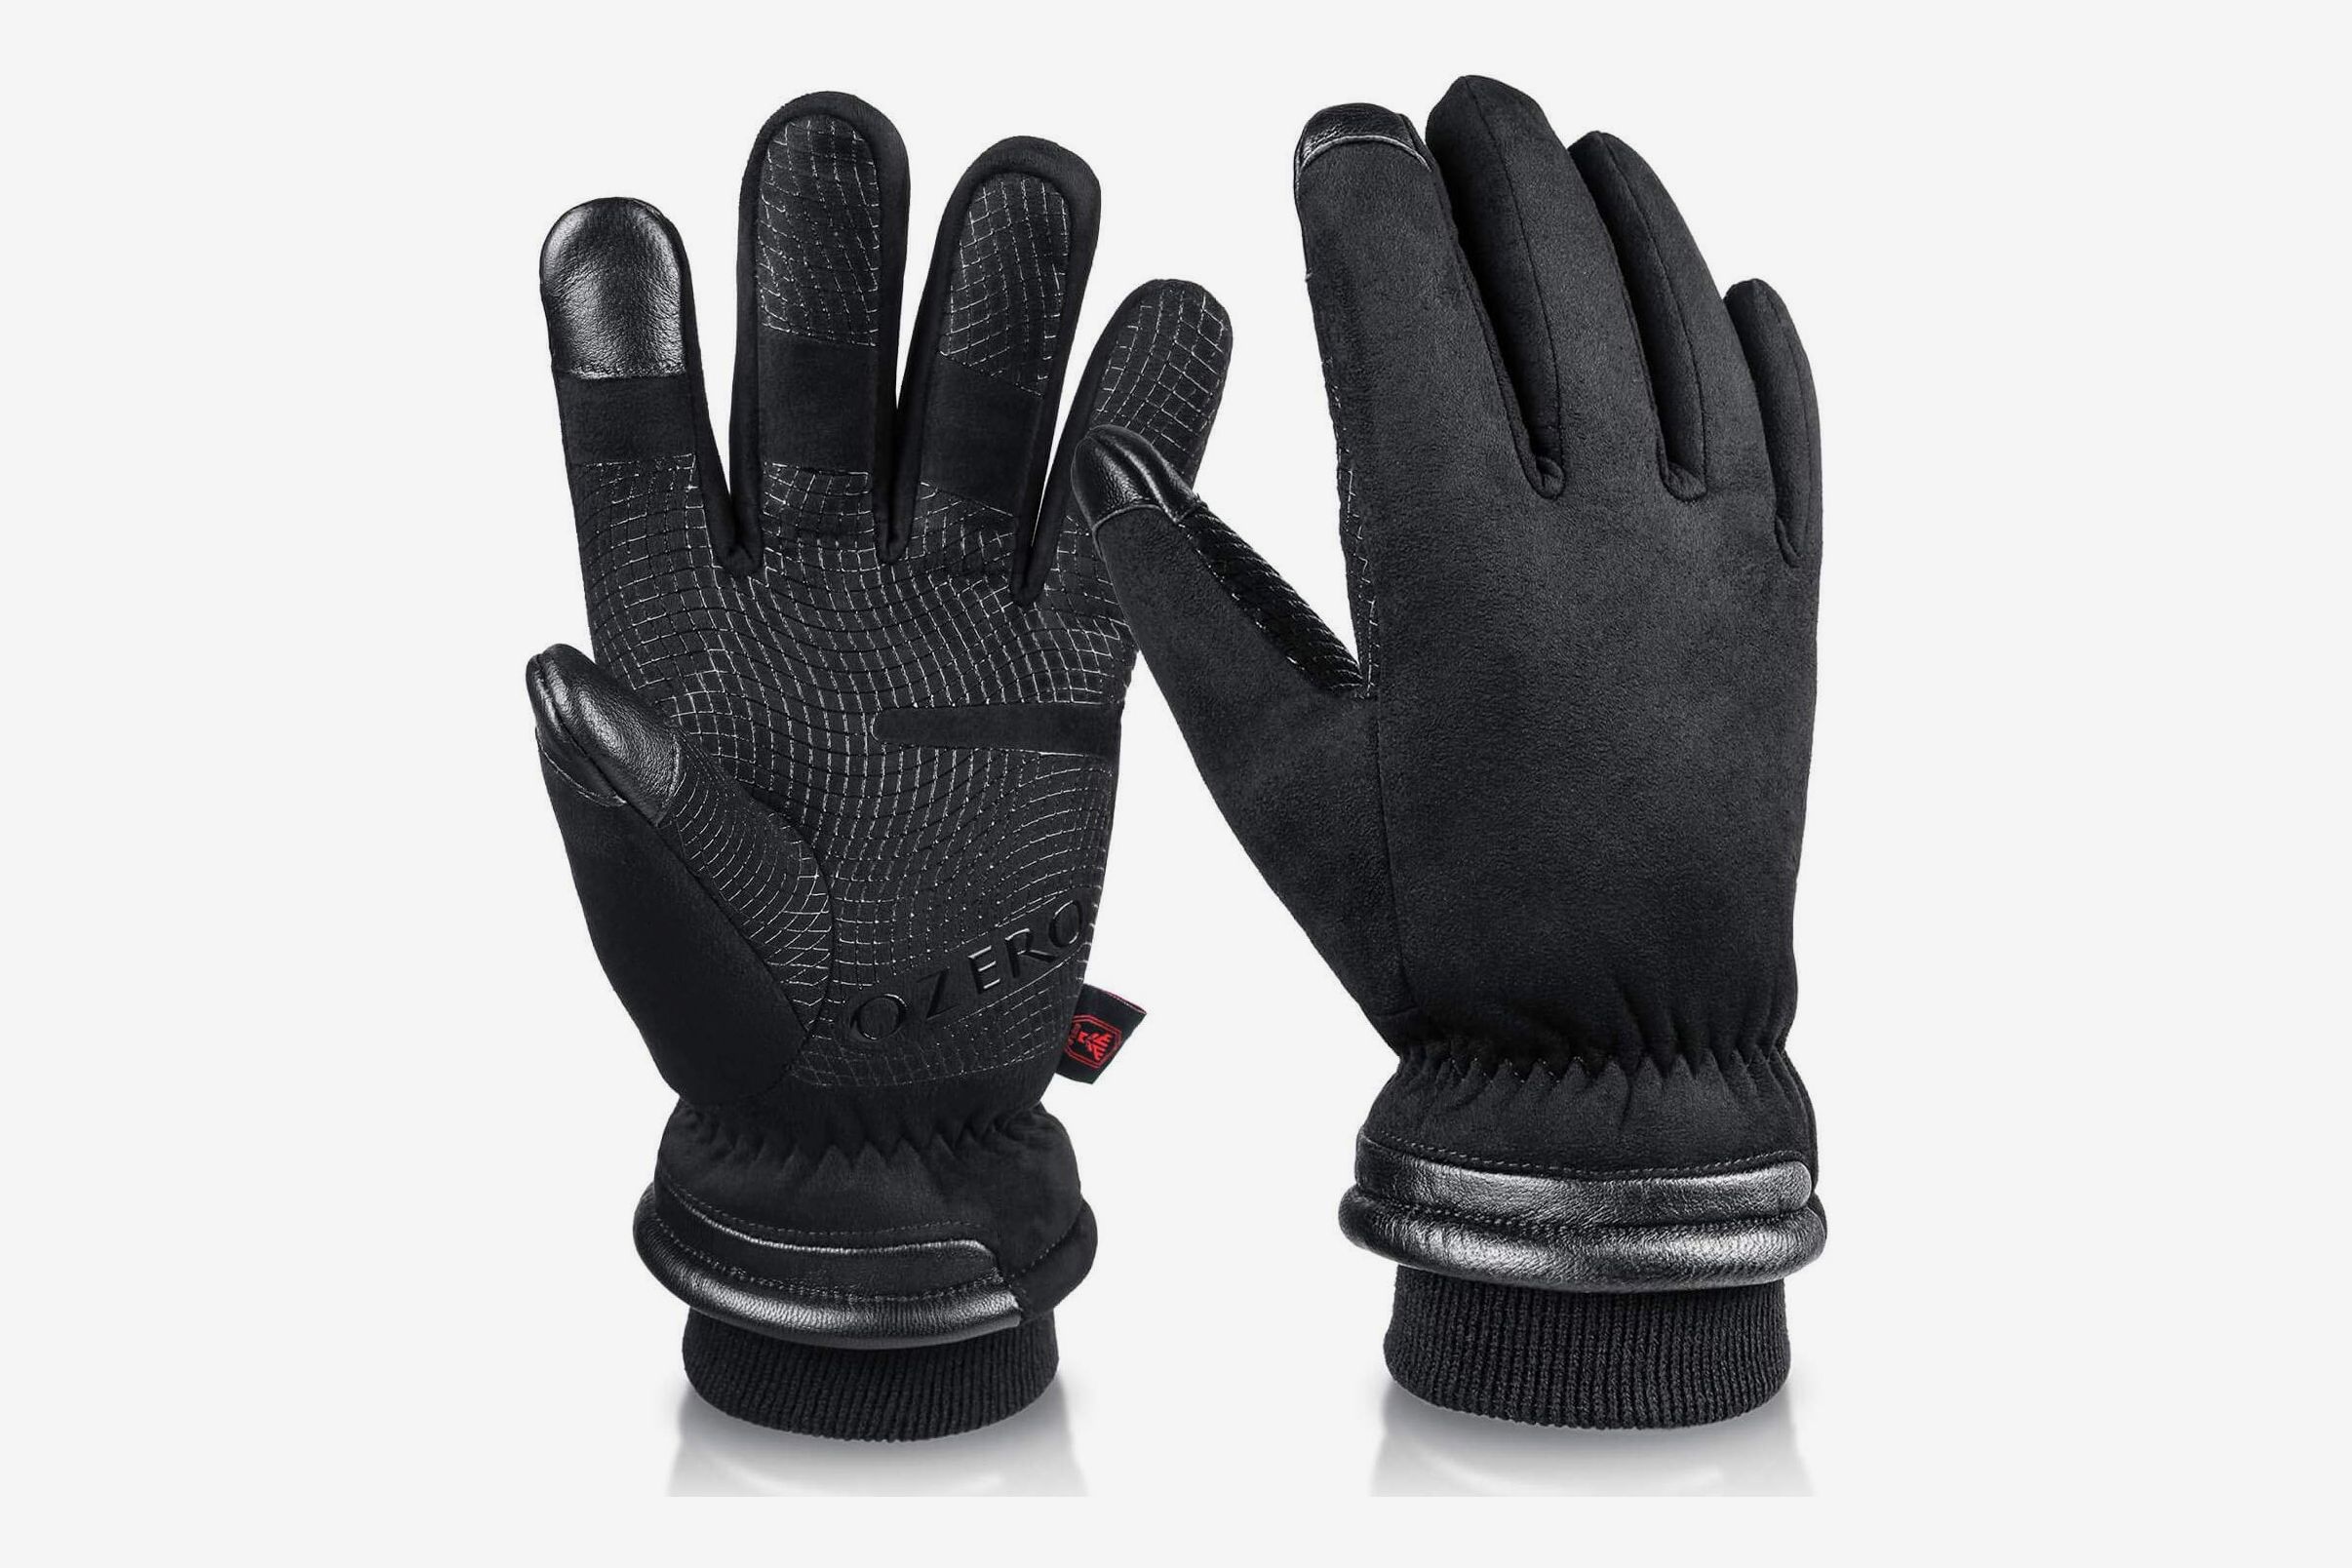 Winter Gloves Men Women Touchscreen Water-Resistant for Driving Running Cycling Thermal Glove Warm Gifts